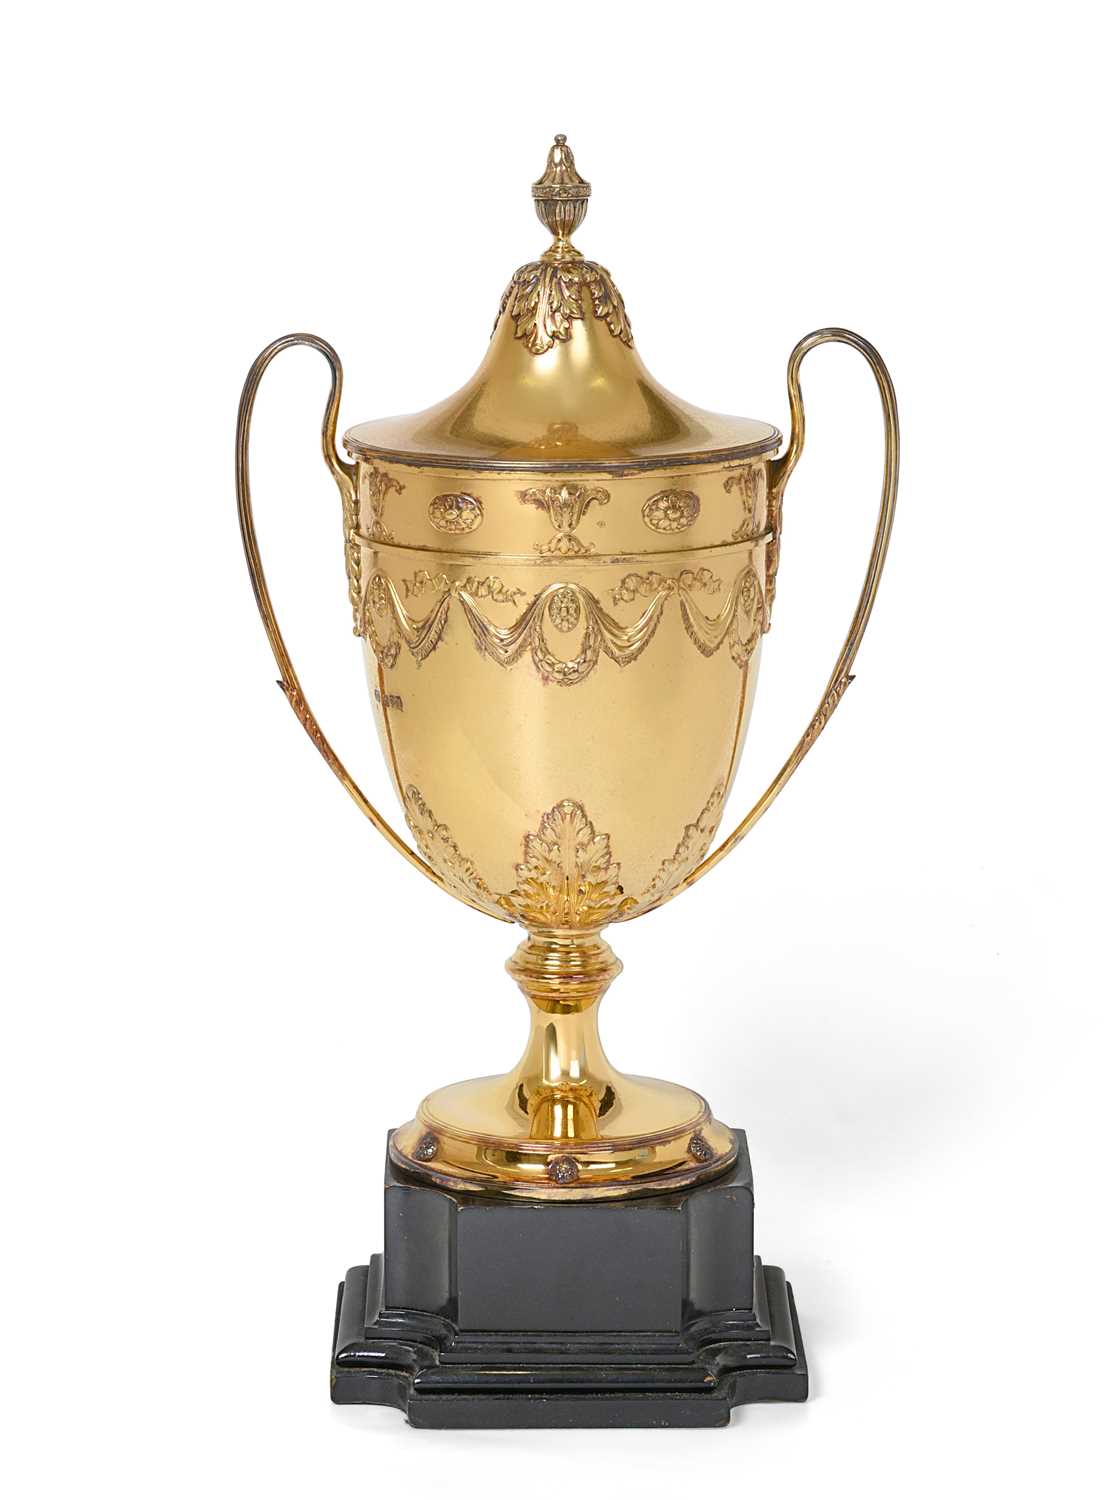 Lot 2126 - An Edward VII Silver-Gilt Cup and Cover